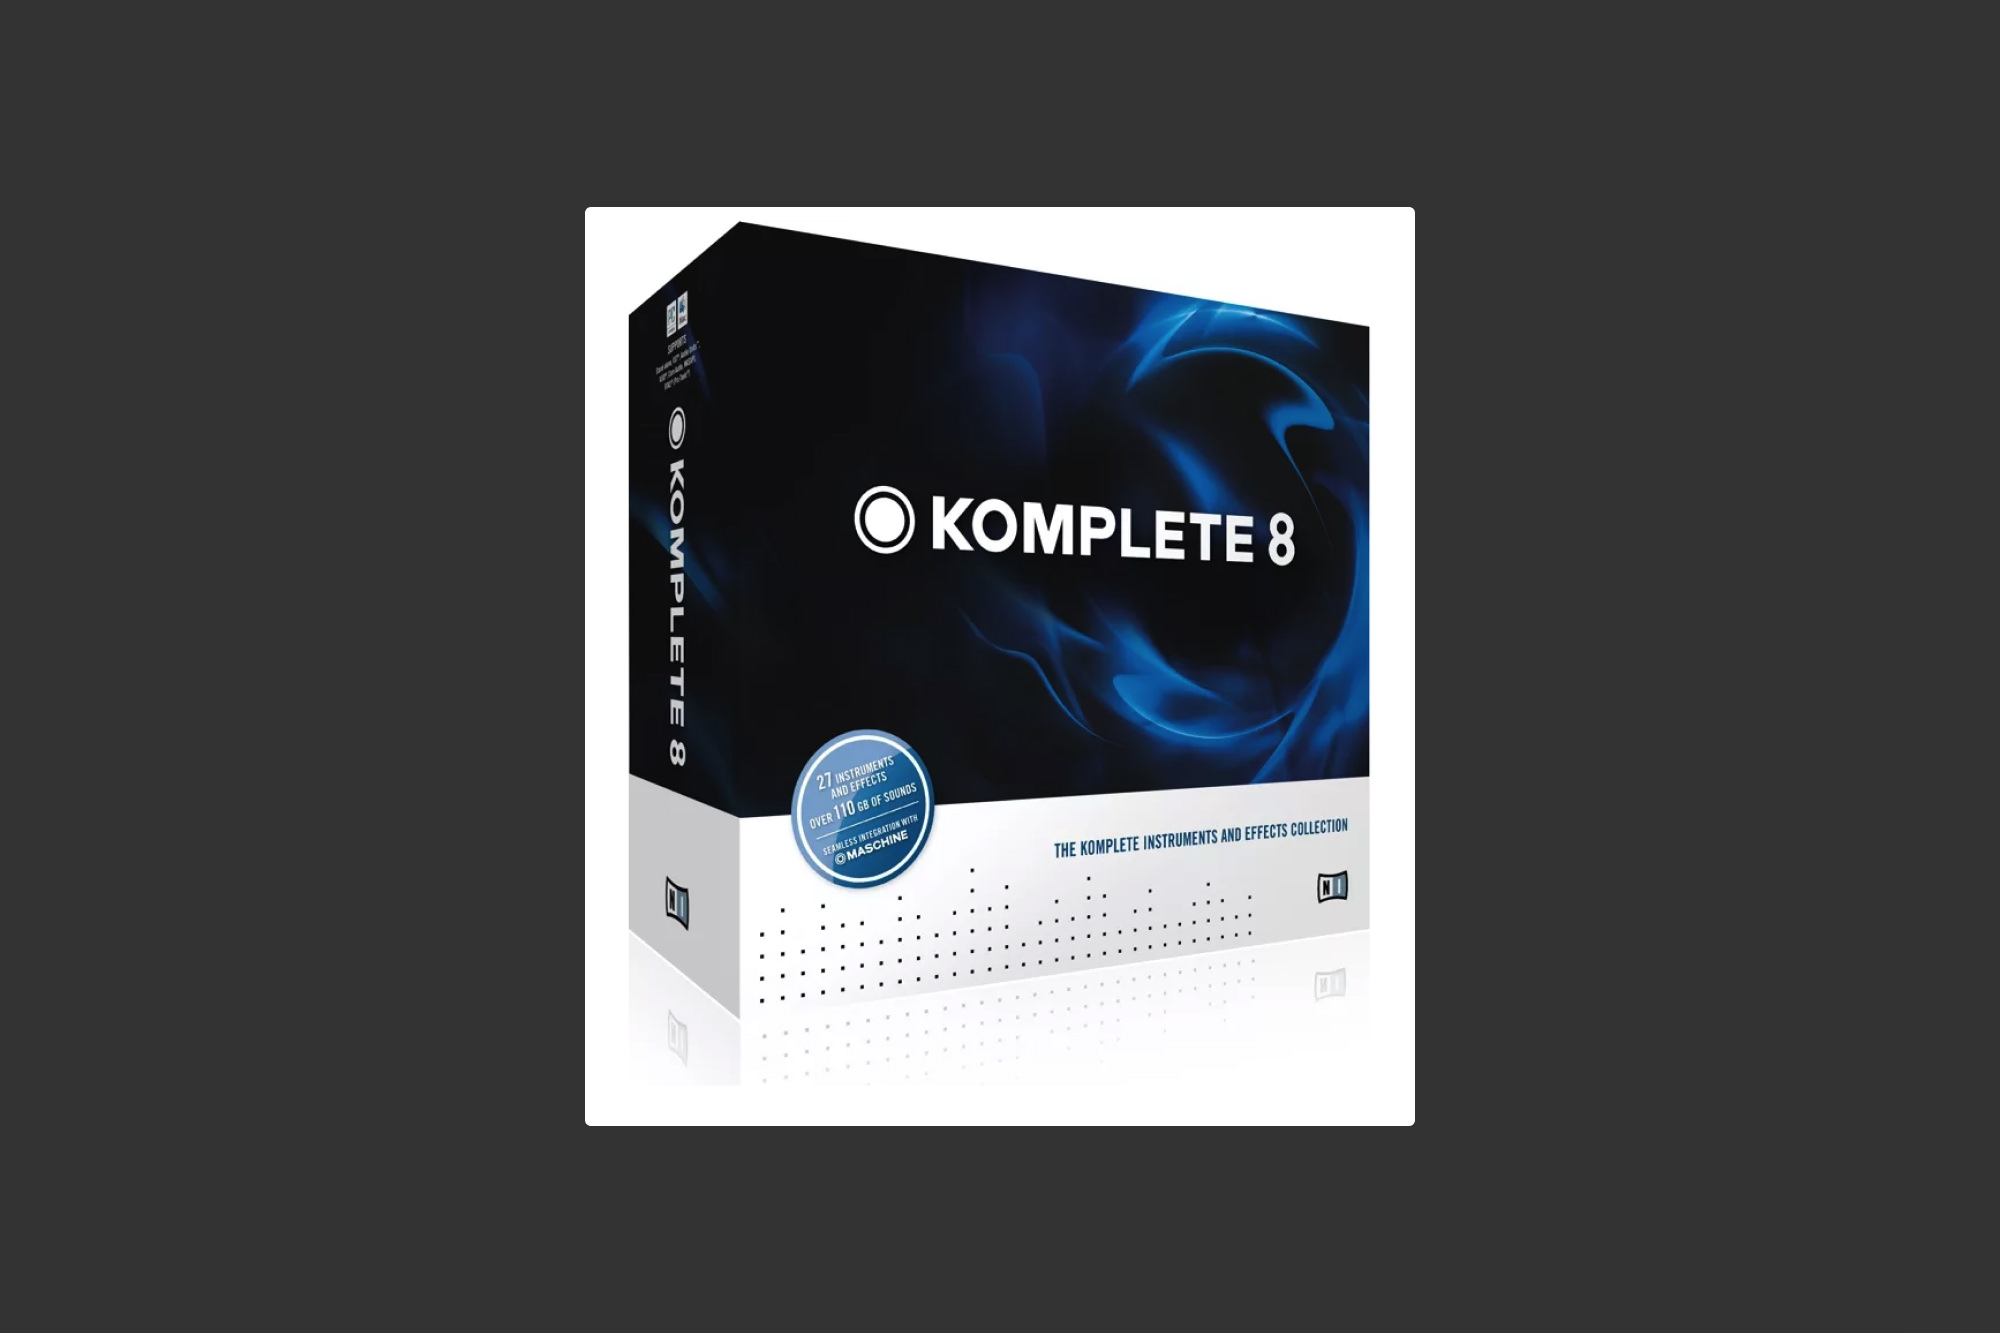 An image of the Native Instruments Komplete.